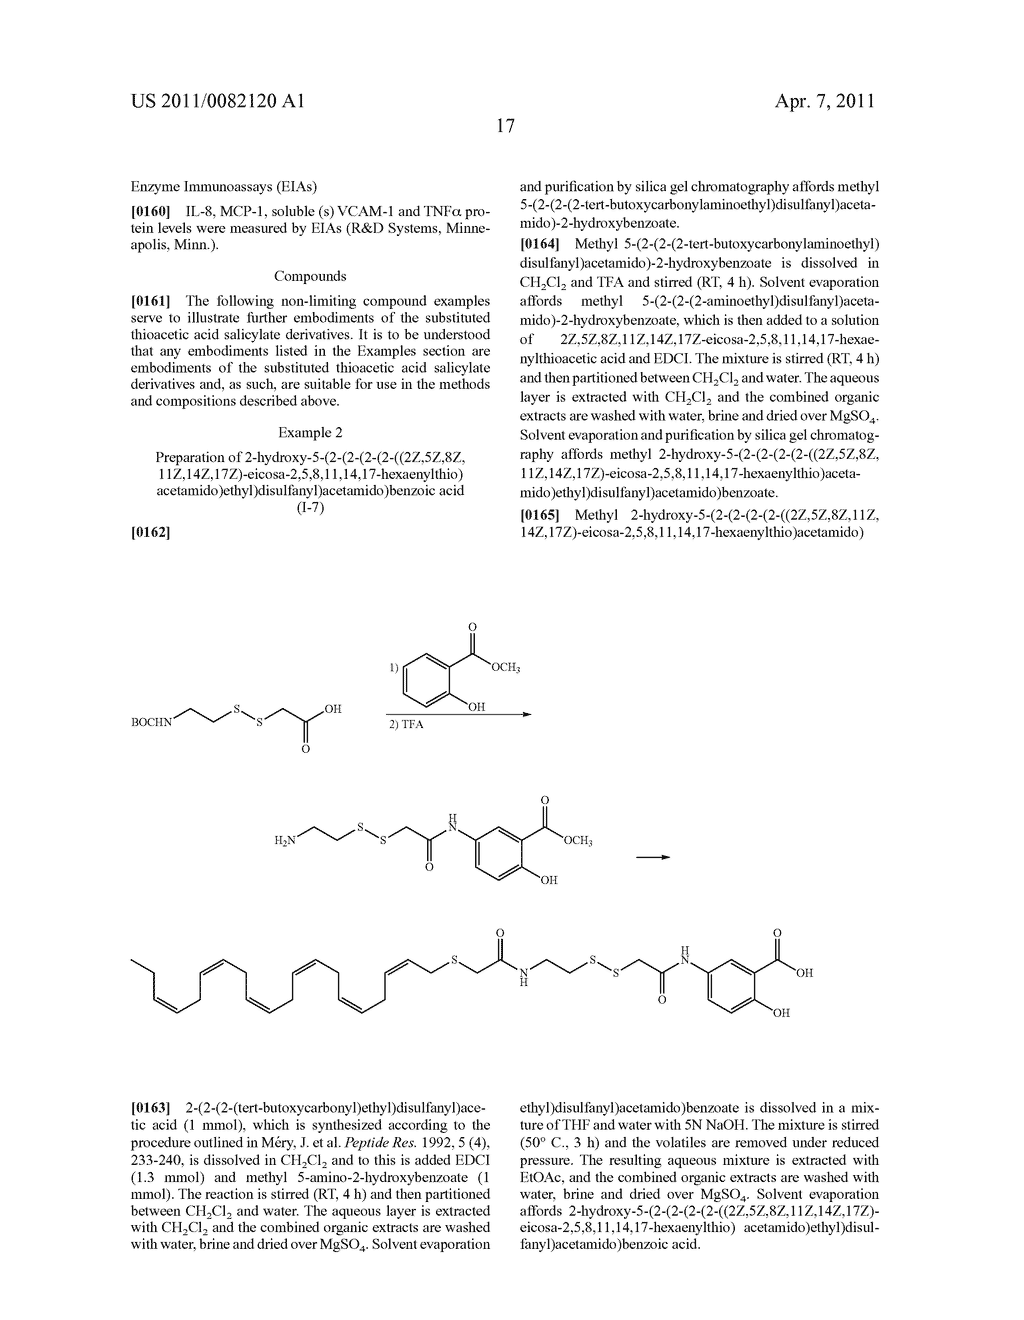 SUBSTITUTED THIOACETIC ACID SALICYLATE DERIVATIVES AND THEIR USES - diagram, schematic, and image 18